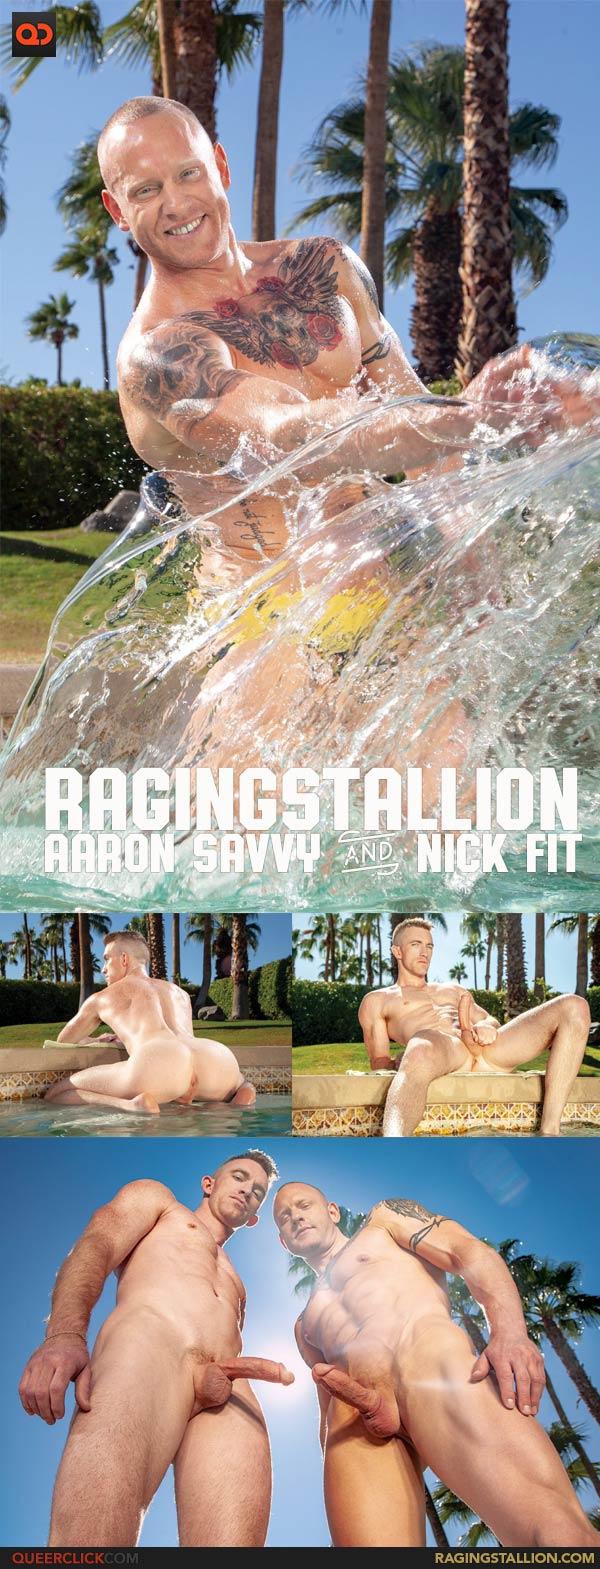 Raging Stallion: Aaron Savvy and Nick Fit